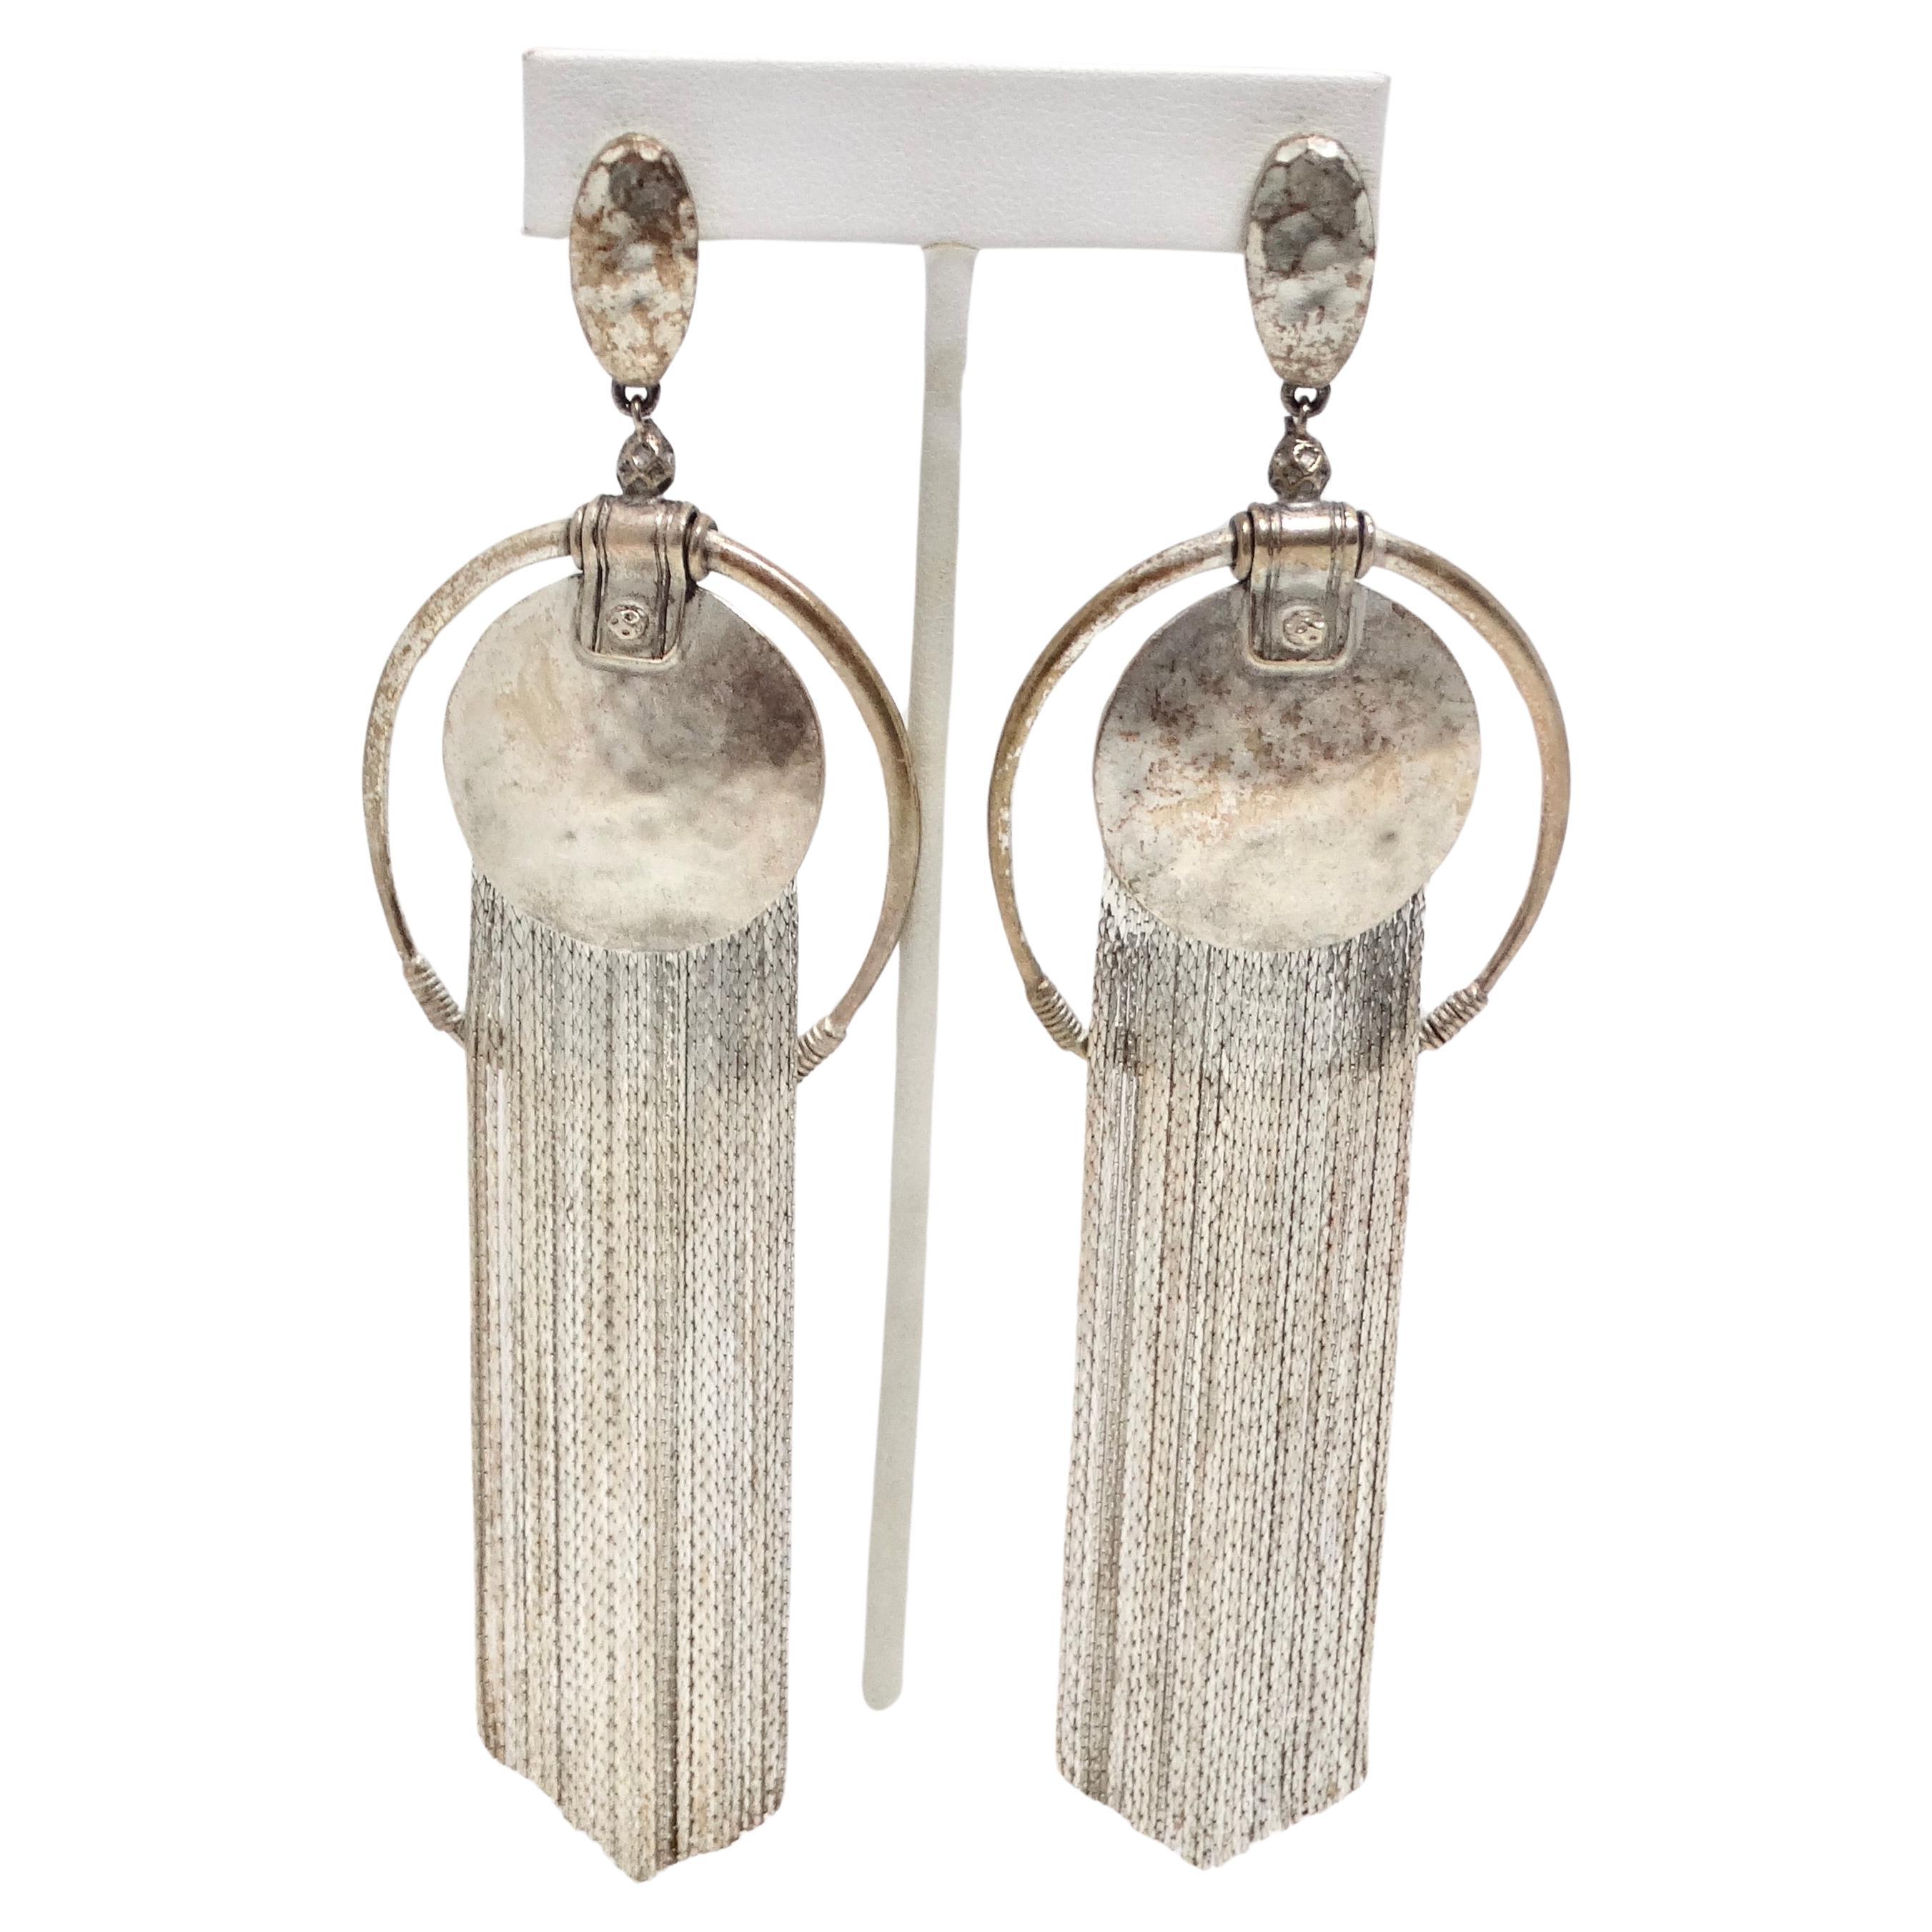 Get your hands on the Jean Paul Gaultier 1990s Silver Fringe Hoop Dangle Earrings, a stunning pair of statement earrings that reflect the artistry and iconic design of this renowned fashion designer. These earrings are the work of Jean Paul